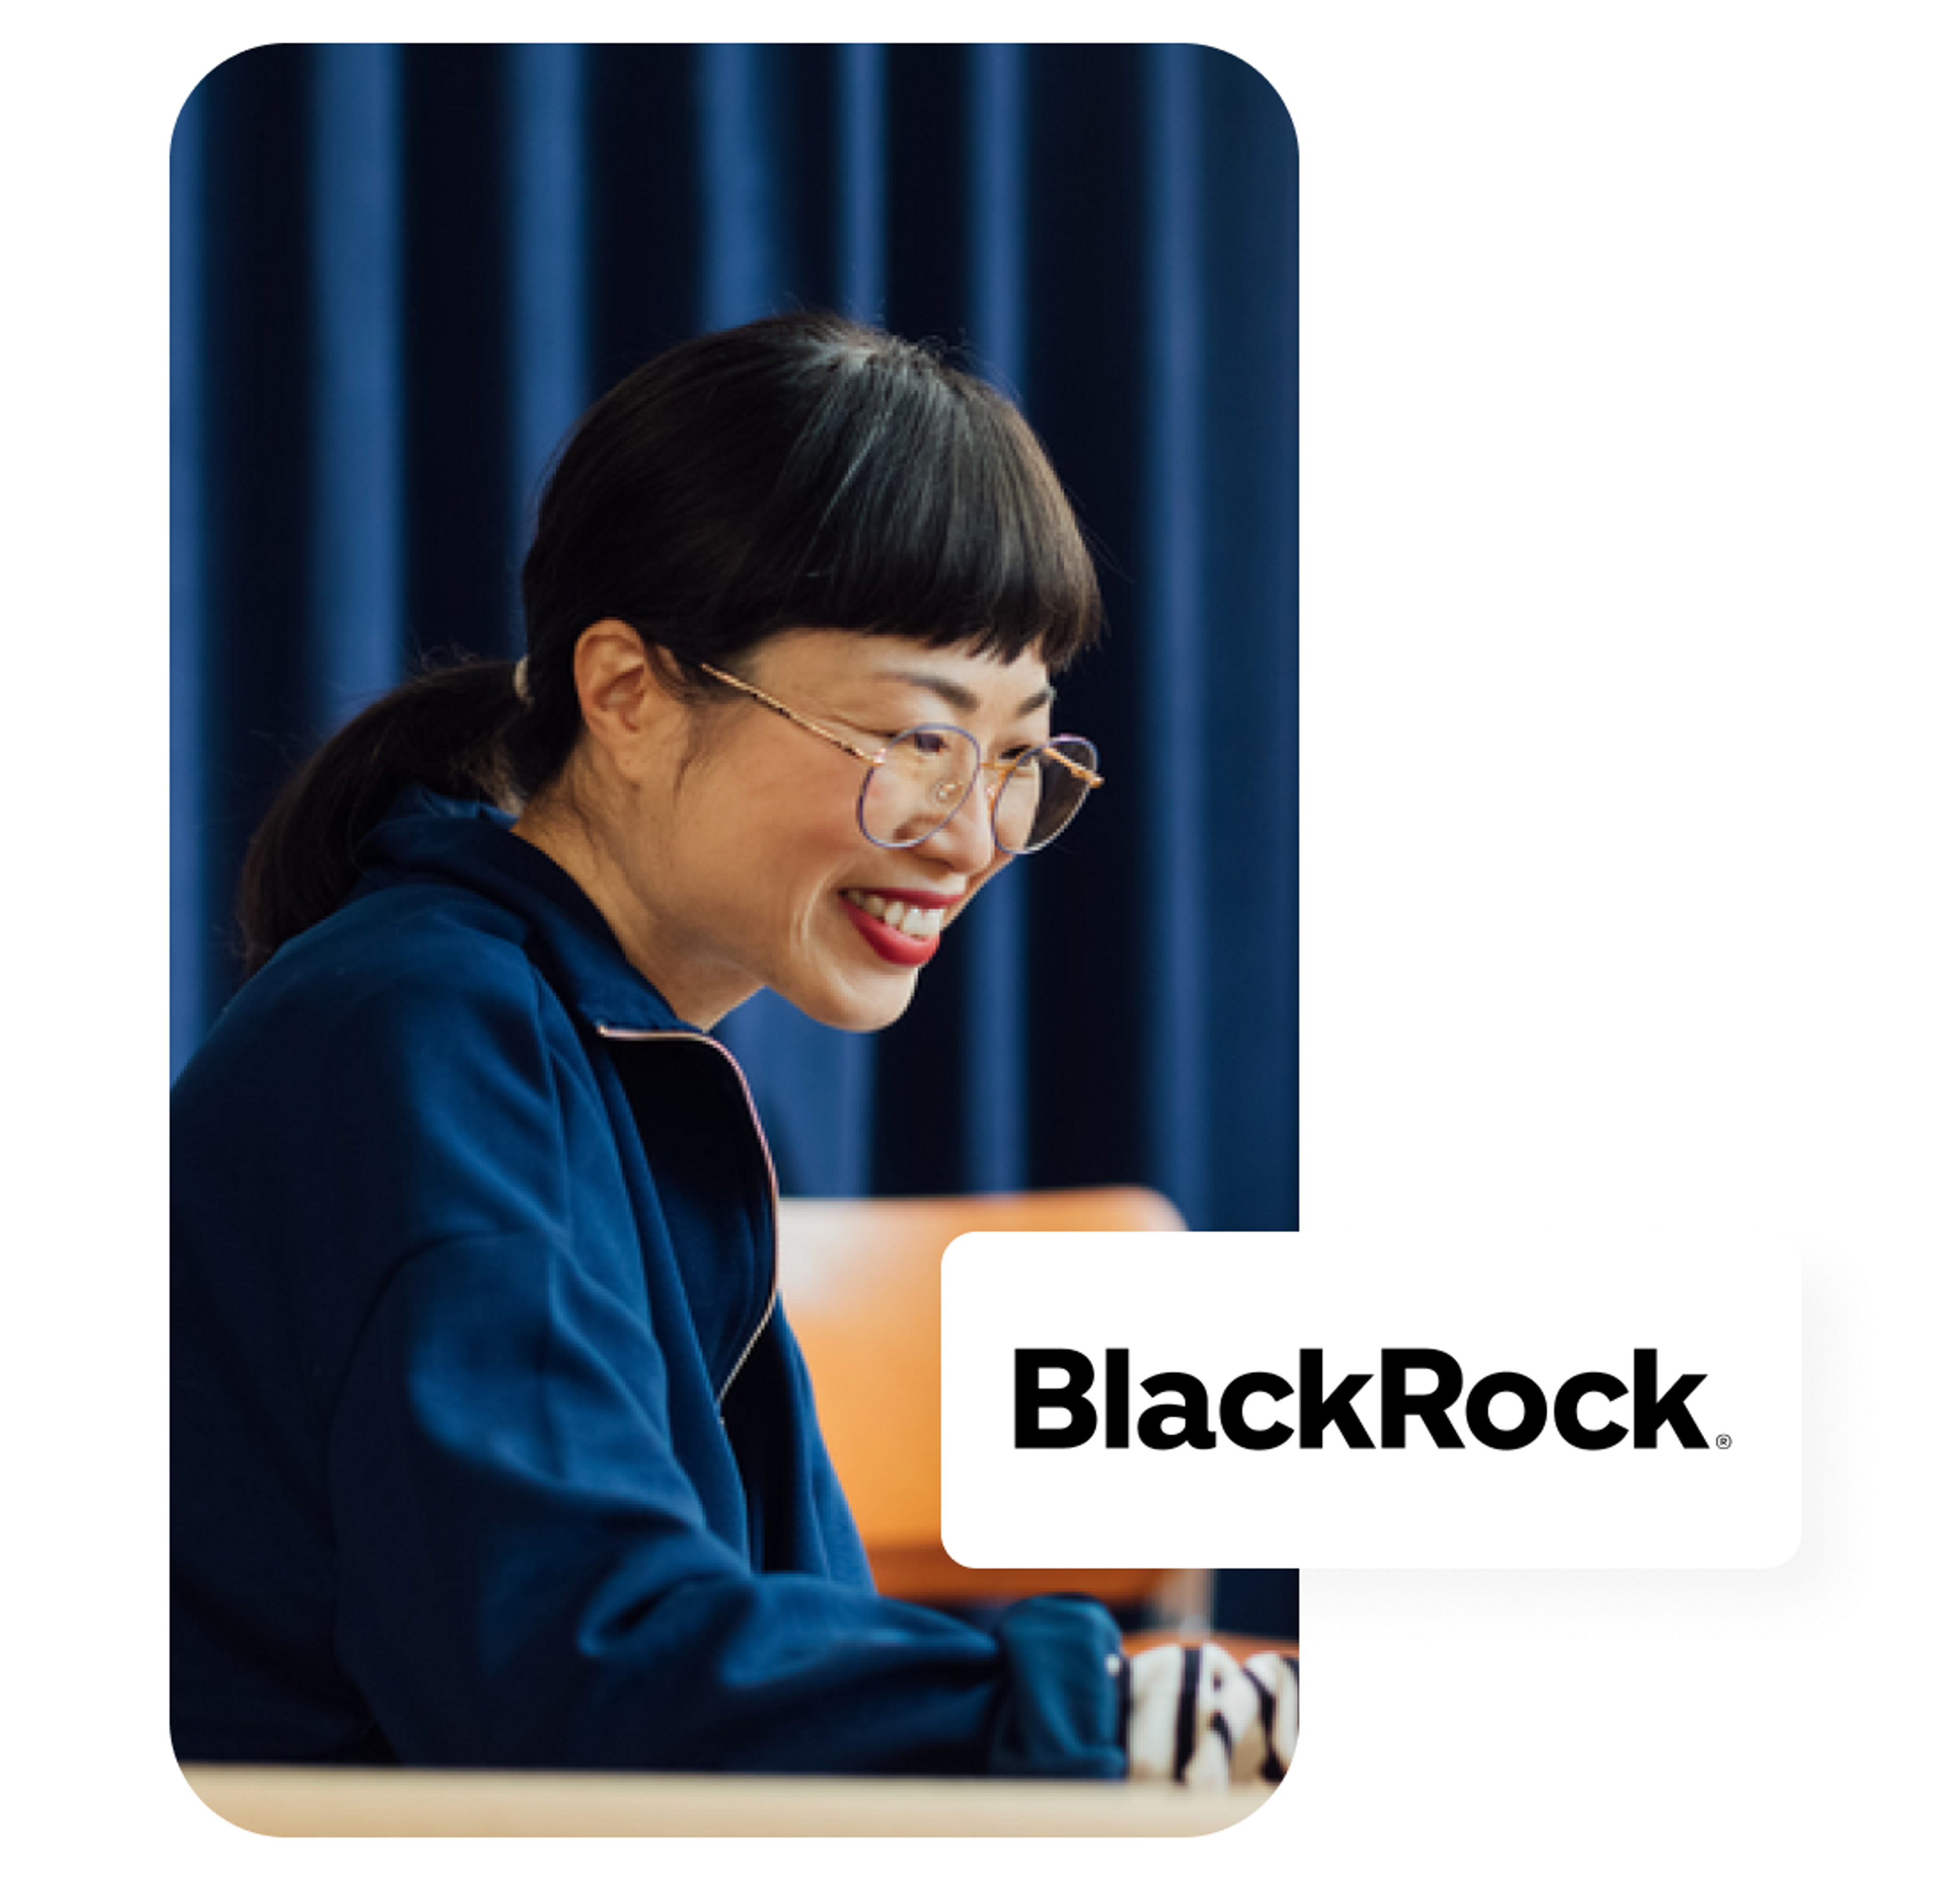 A photo of a woman smiling while looking at a laptop and the BlackRock logo